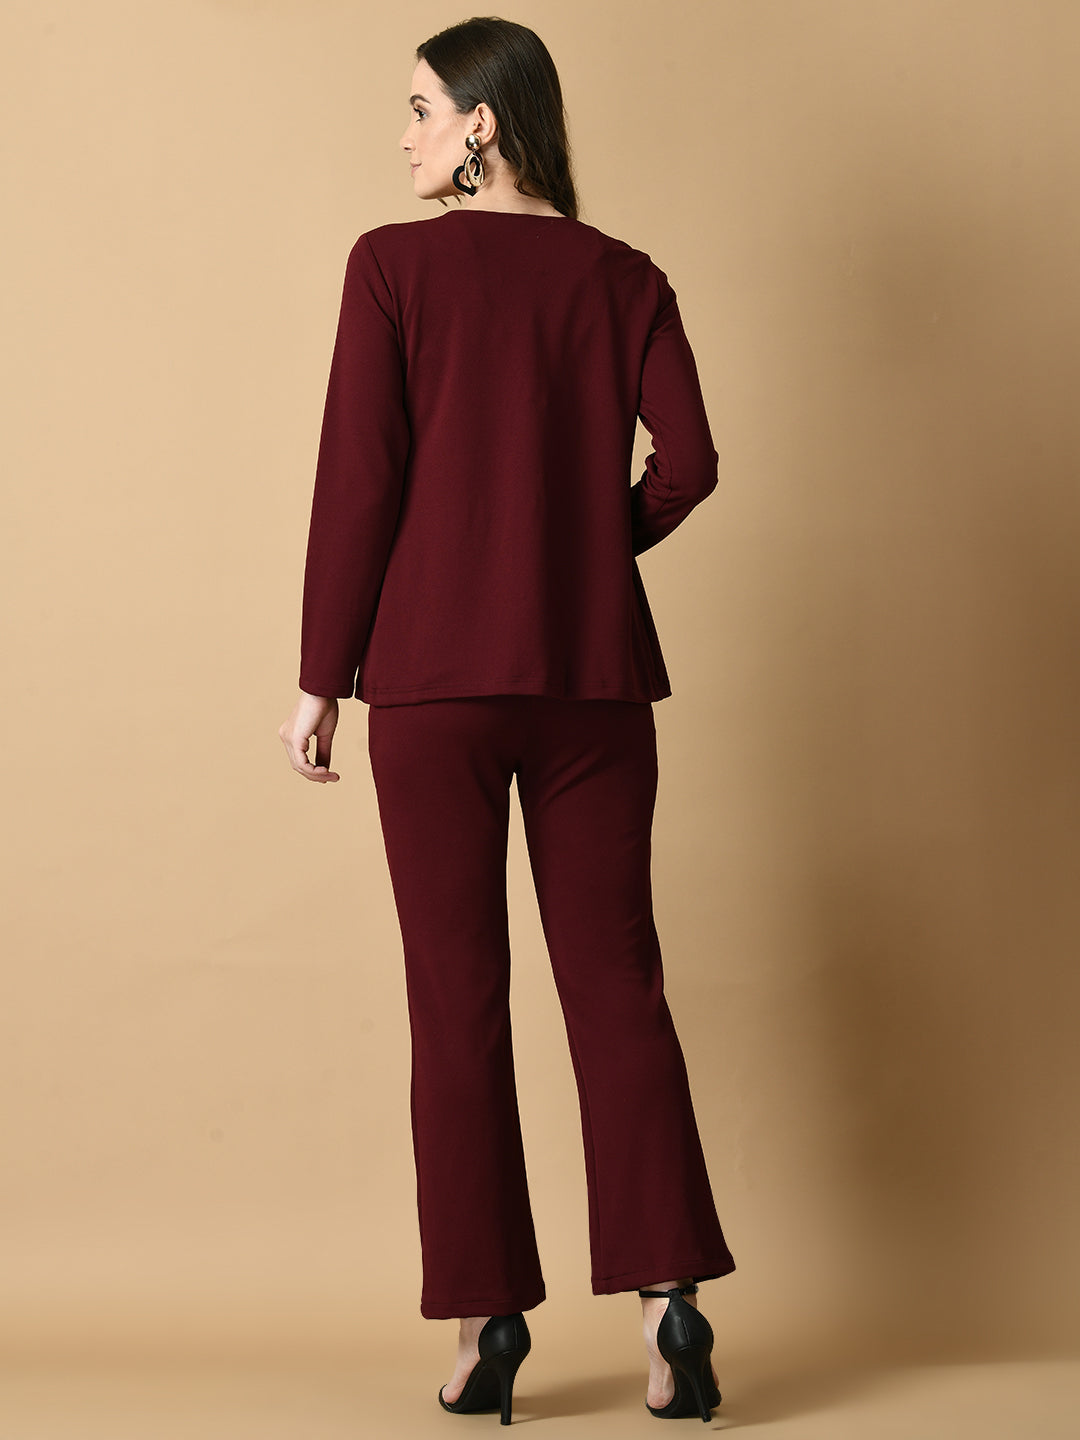 Women's Magenta Solid Coat With  Trousers  - Myshka